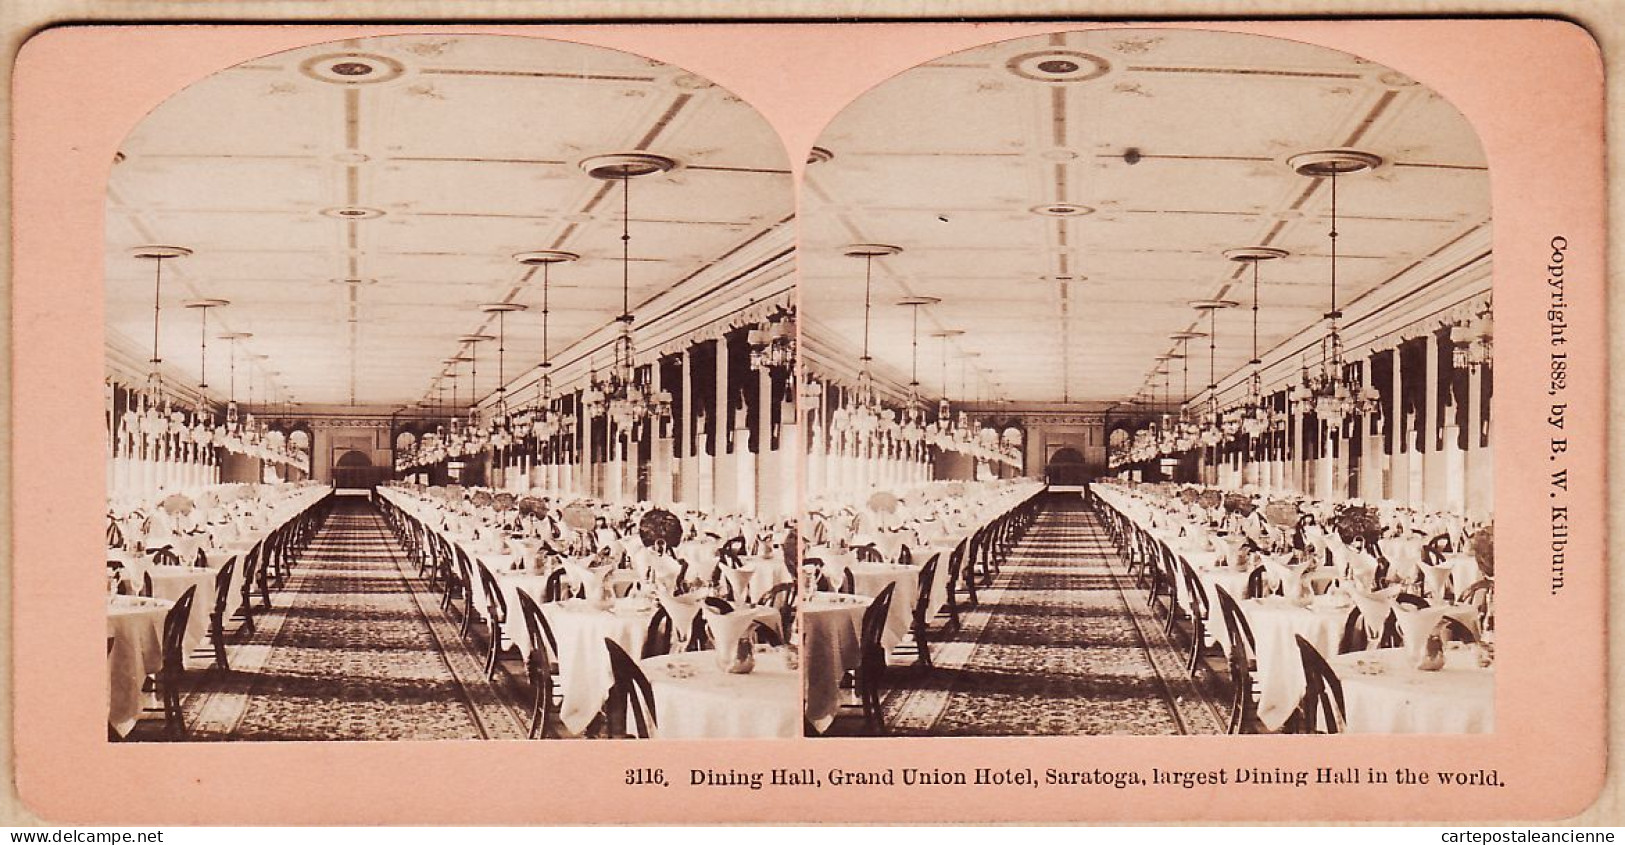 04585 / U.S.A KILBURN 1882 SARATOGA HOTEL GRAND UNION Dining Hall Largest Dining Hall In The World Photo Stereoview 3116 - Photos Stéréoscopiques